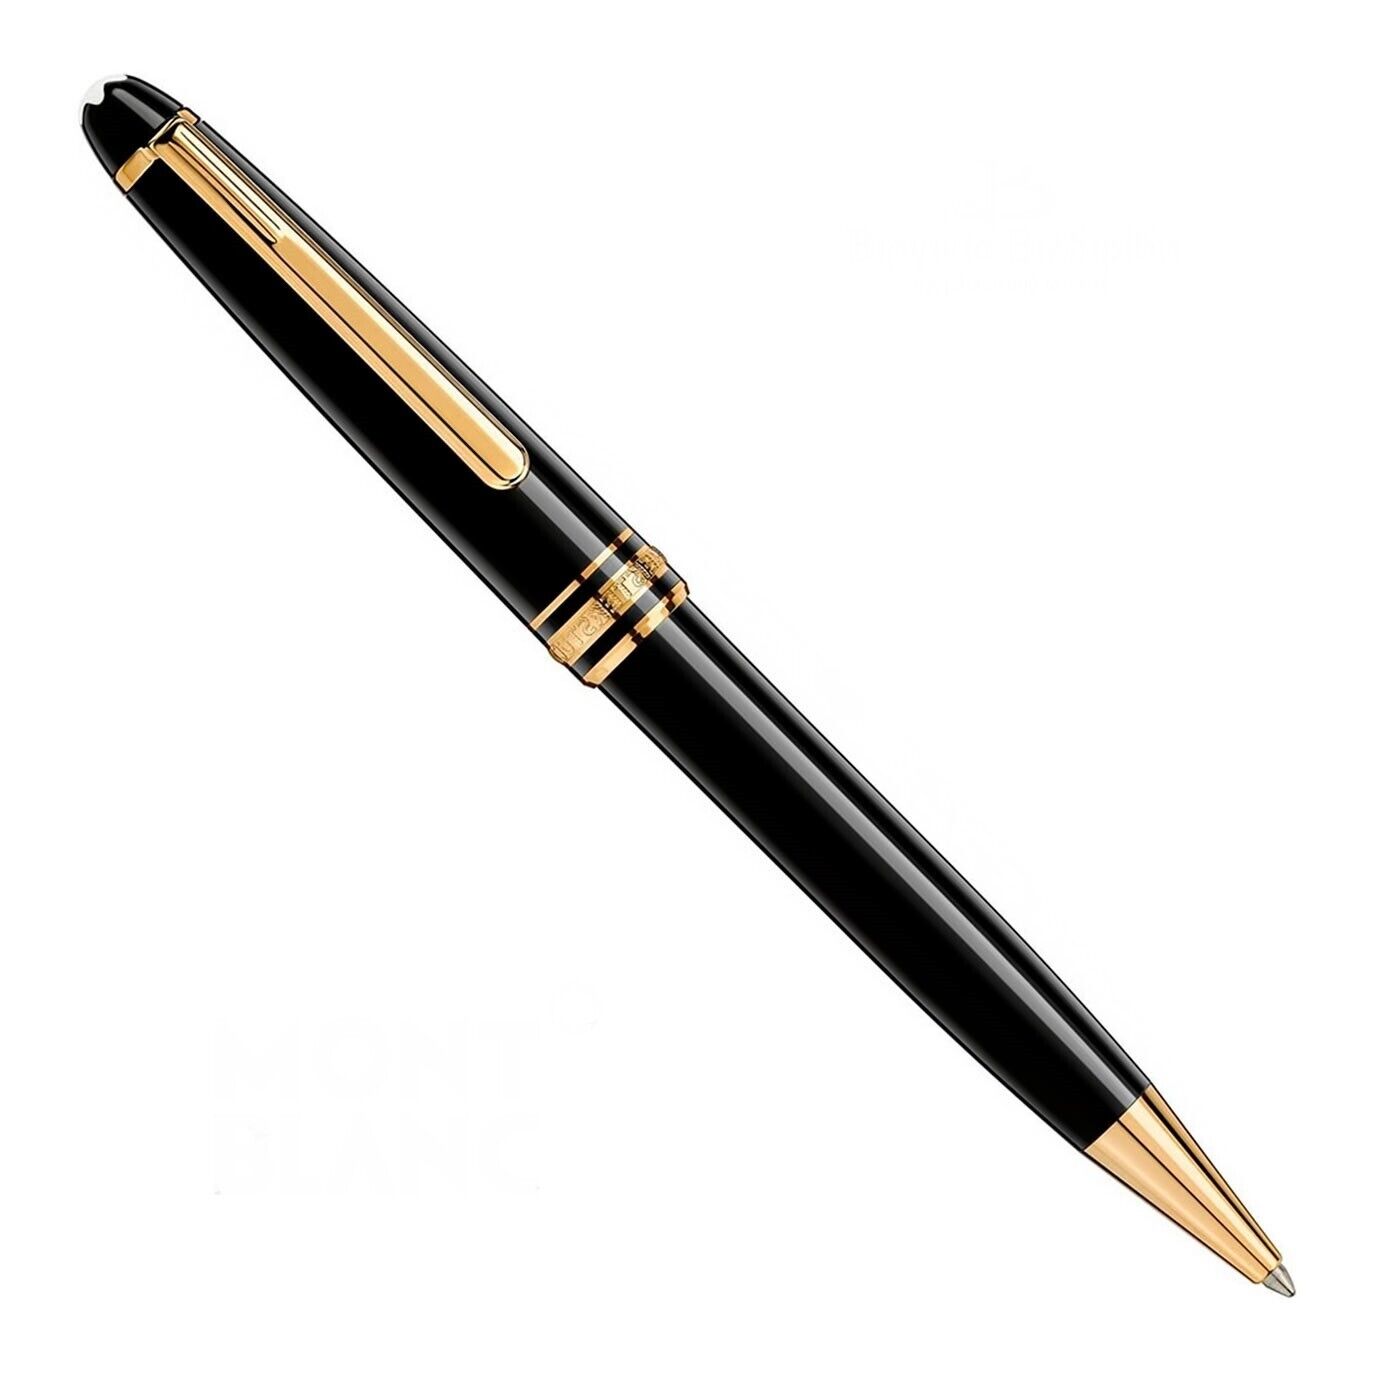 New Montblanc Gold  Meisterstuck Classique  Ballpoint Pen 164 in Leather case